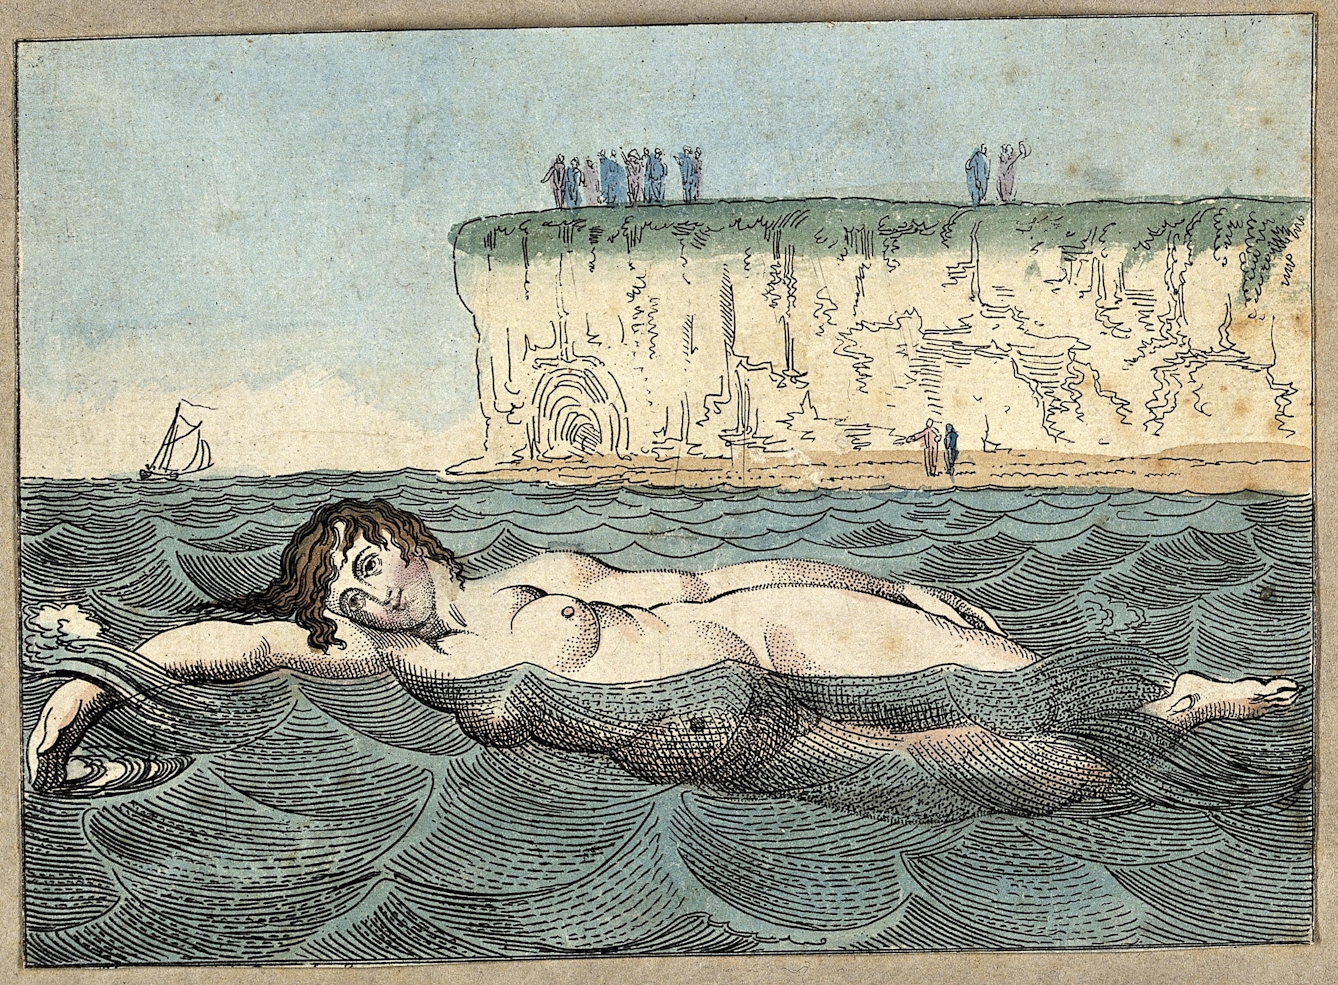 Coloured line engraving of a woman swimming in the waves of the sea whilst behind people stand on the beach and cliffs.